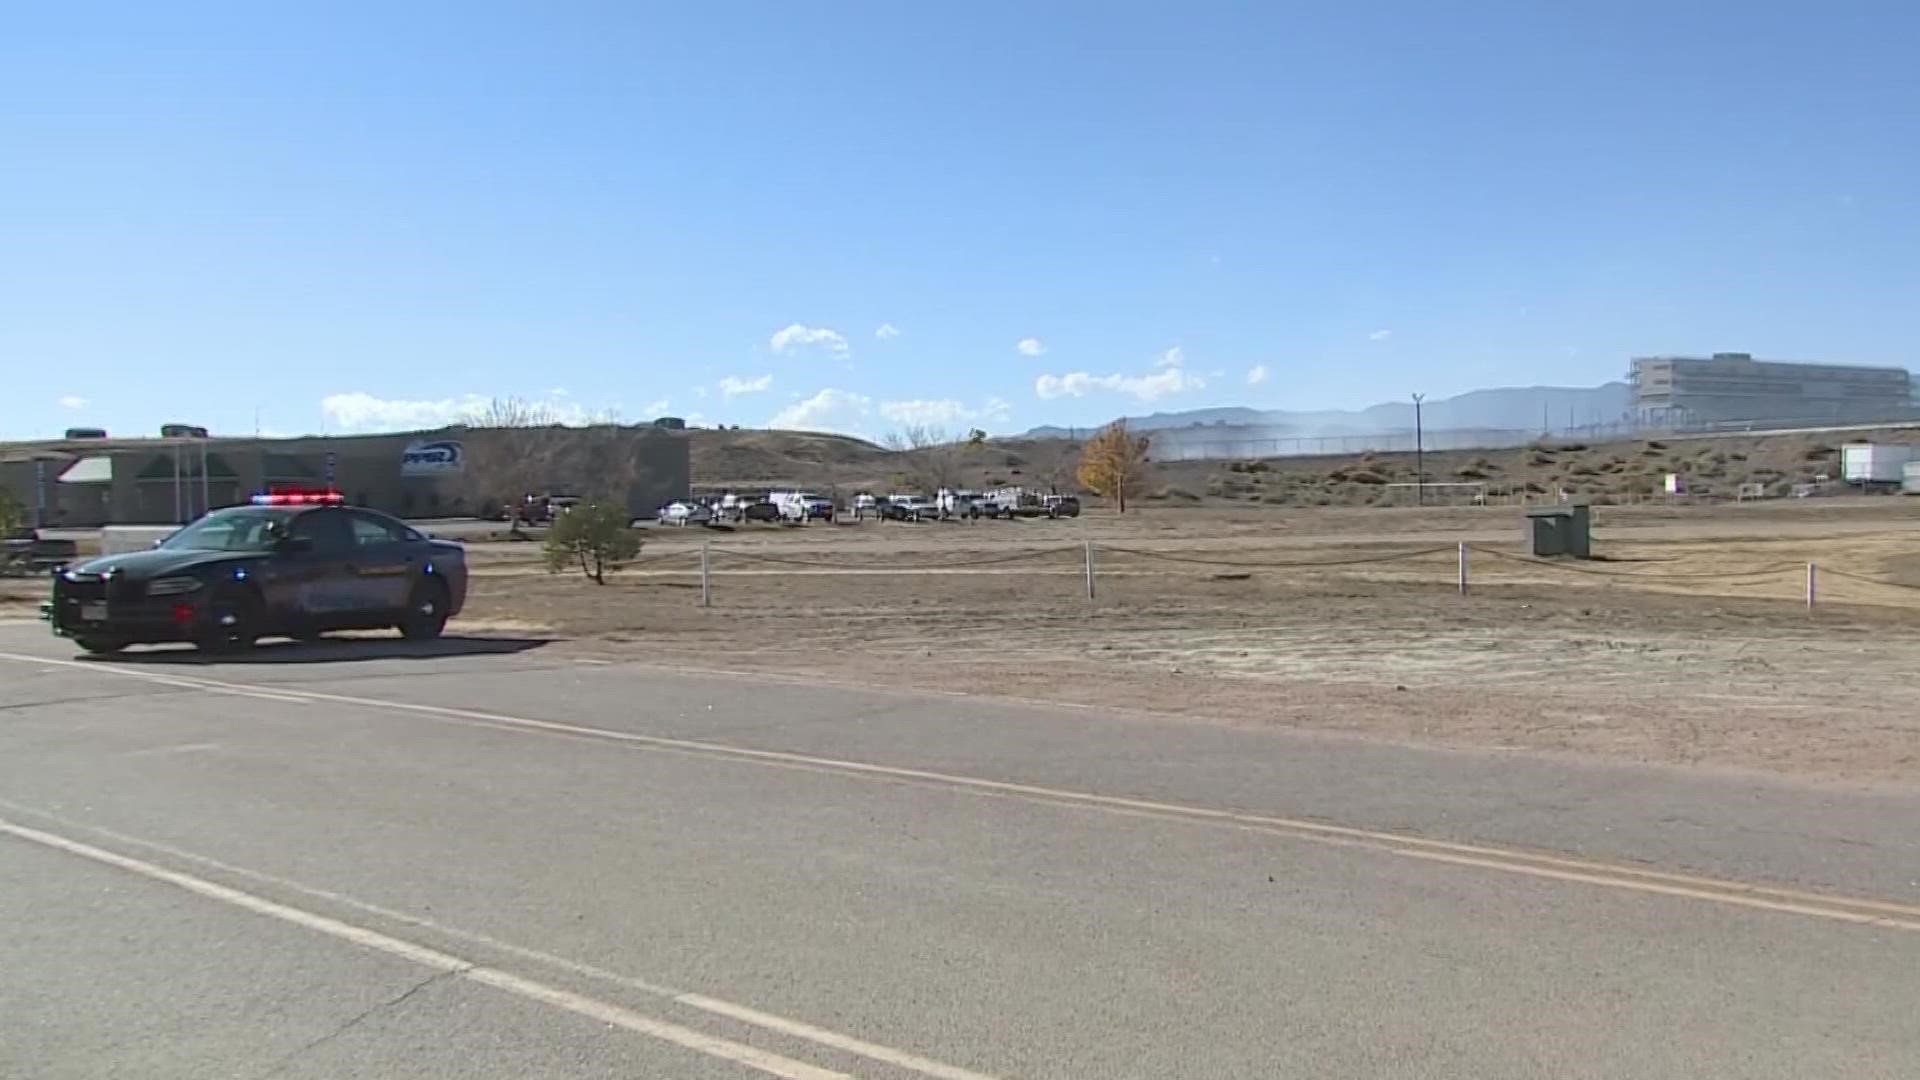 Residents near Pikes Peak International Speedway had to evacuate for hours while fire crews worked to slow the fire's spread.